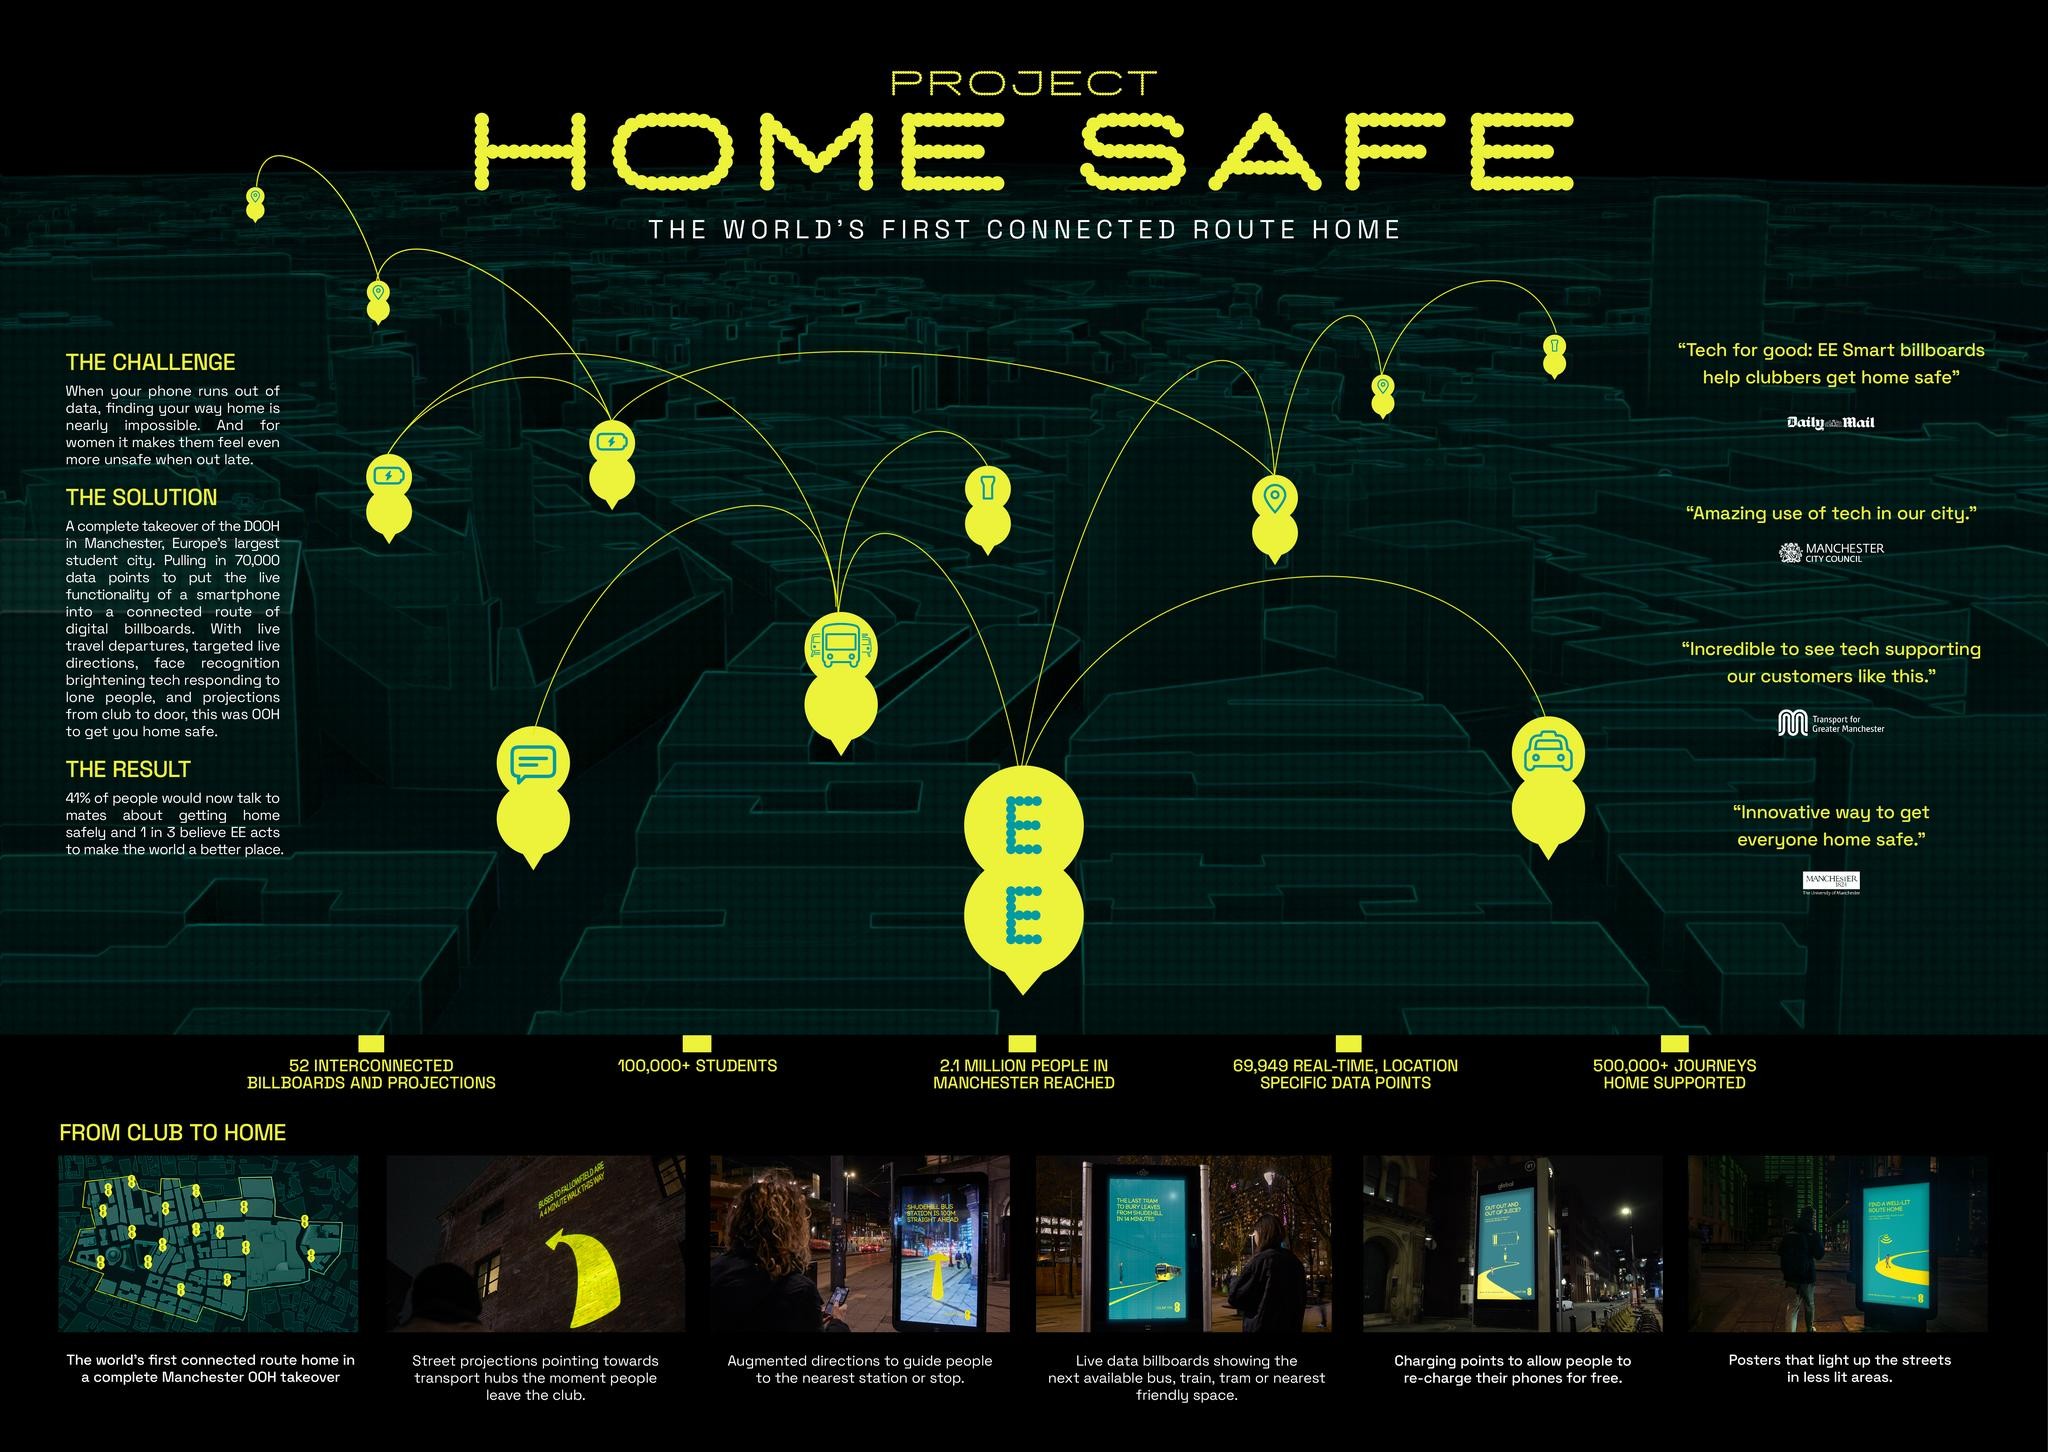 Project Homesafe